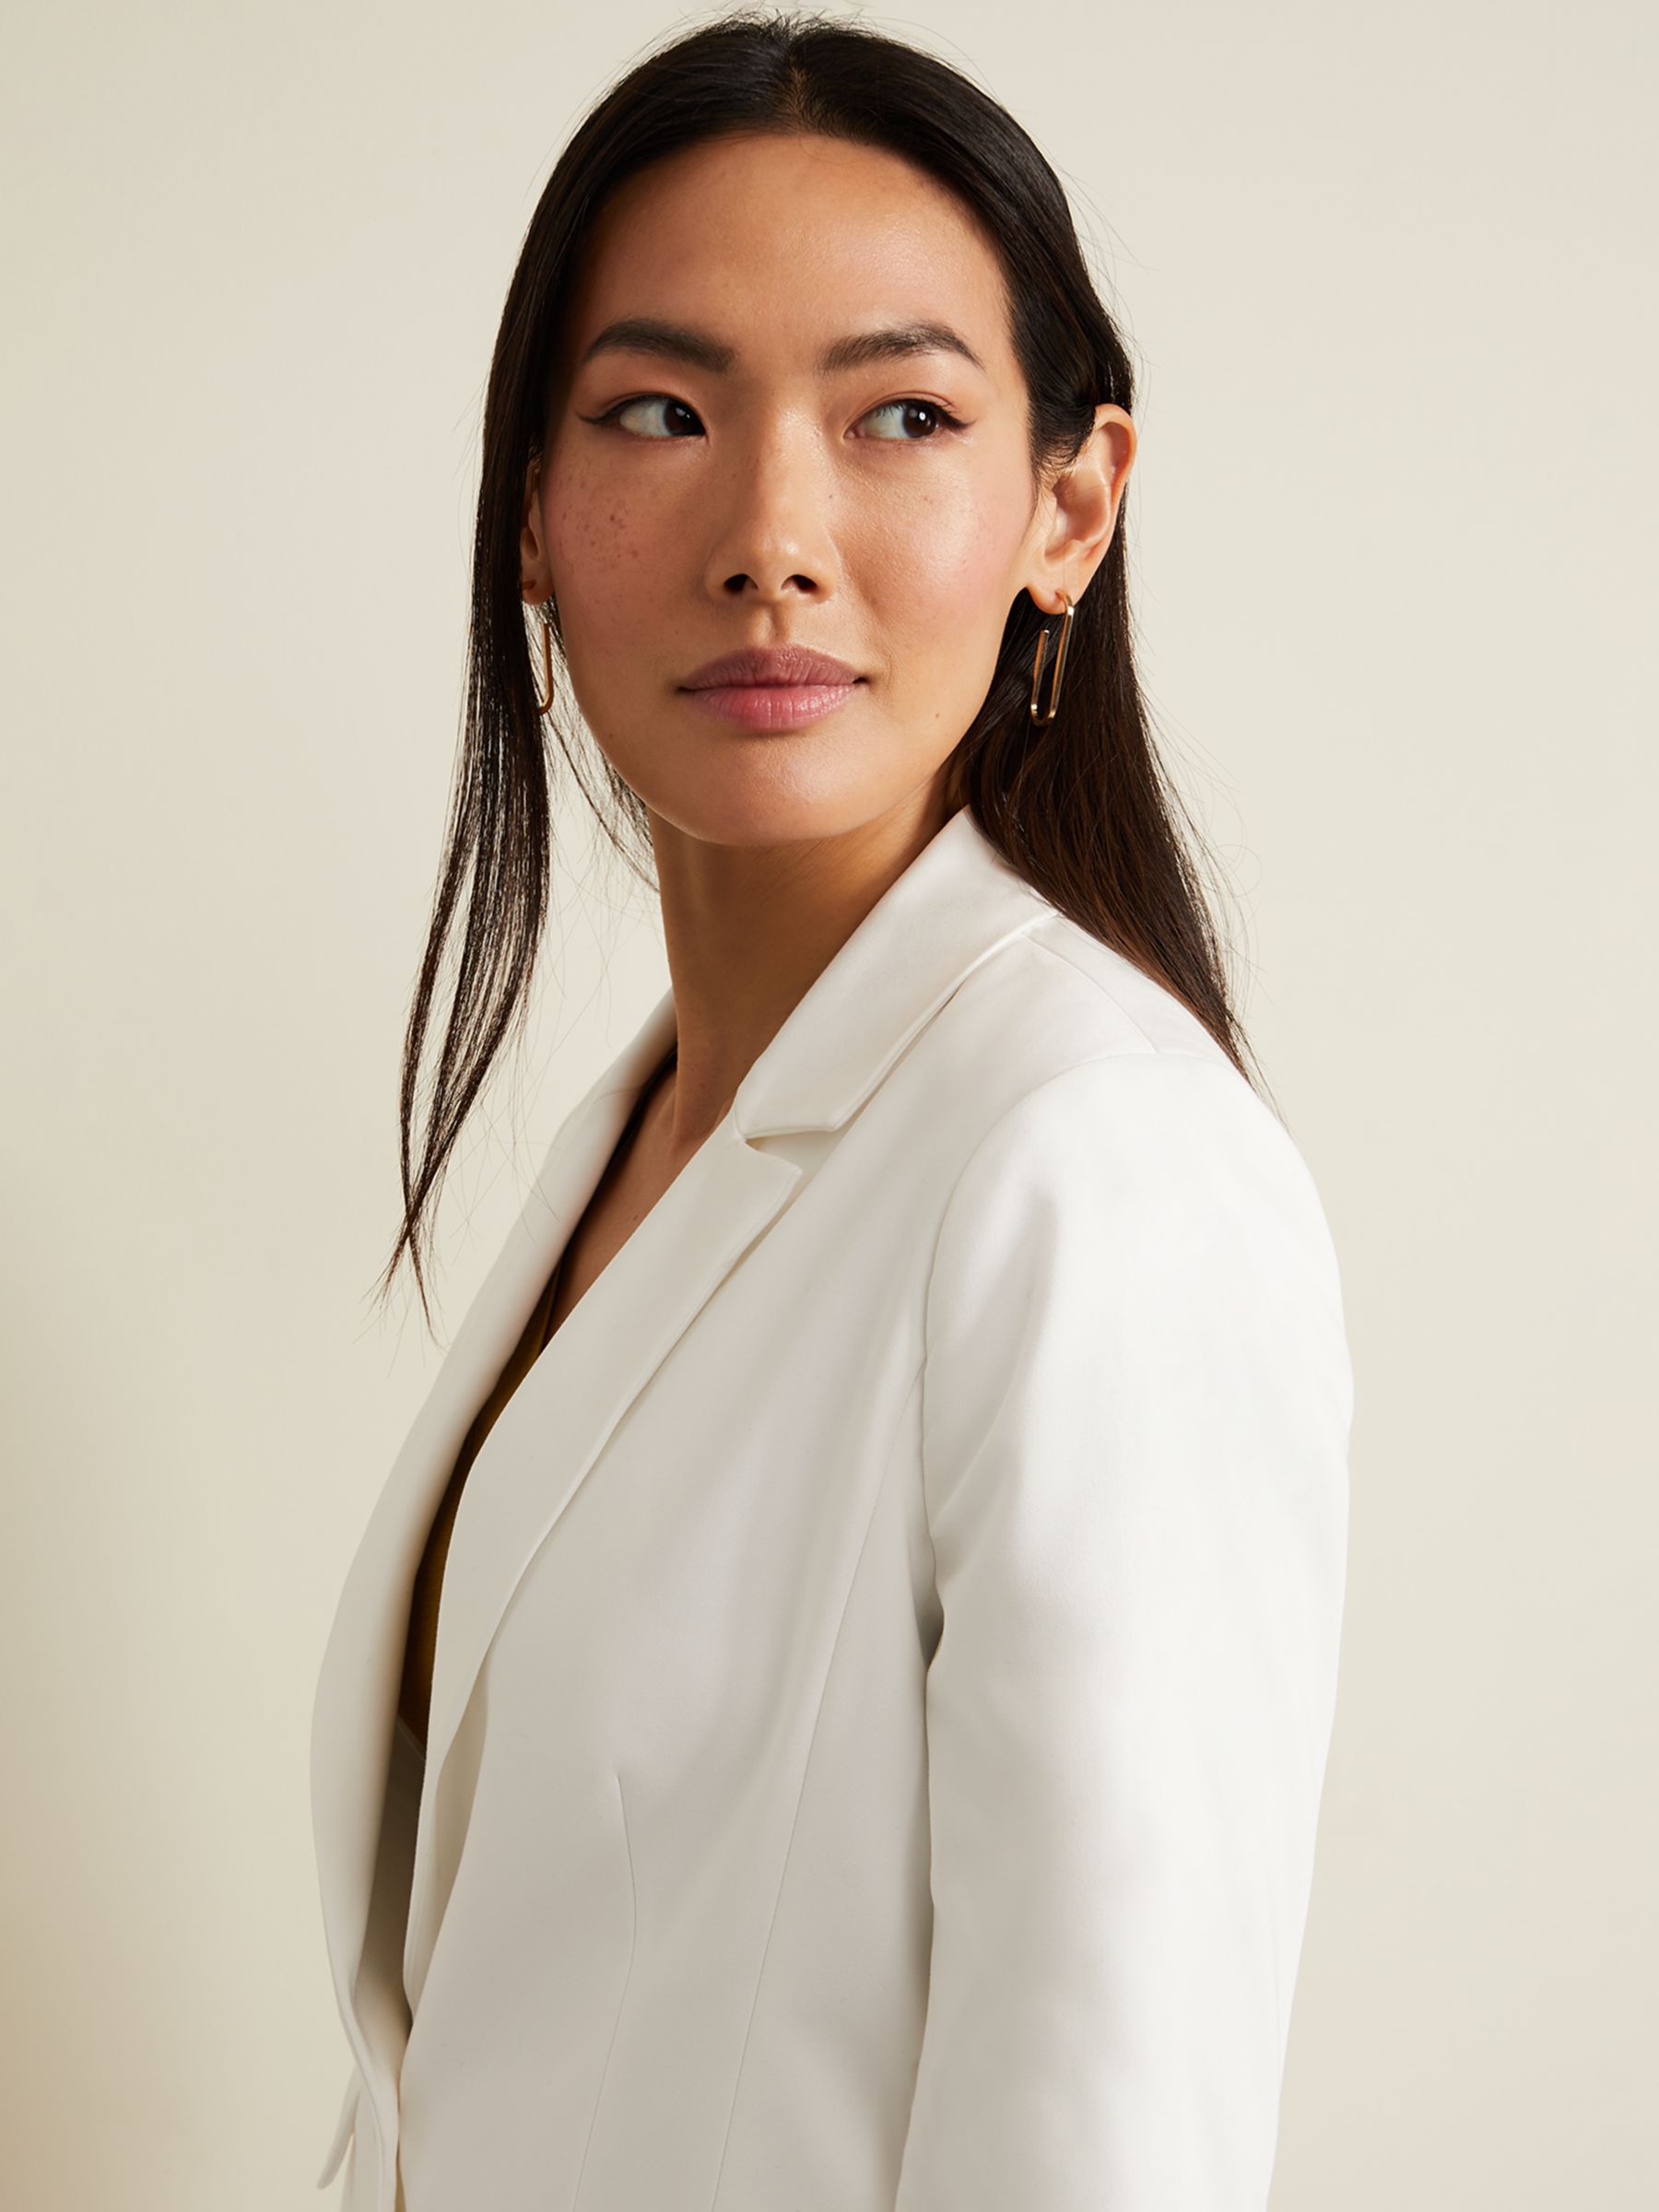 Buy Phase Eight Ulrica Fitted Suit Jacket, White Online at johnlewis.com